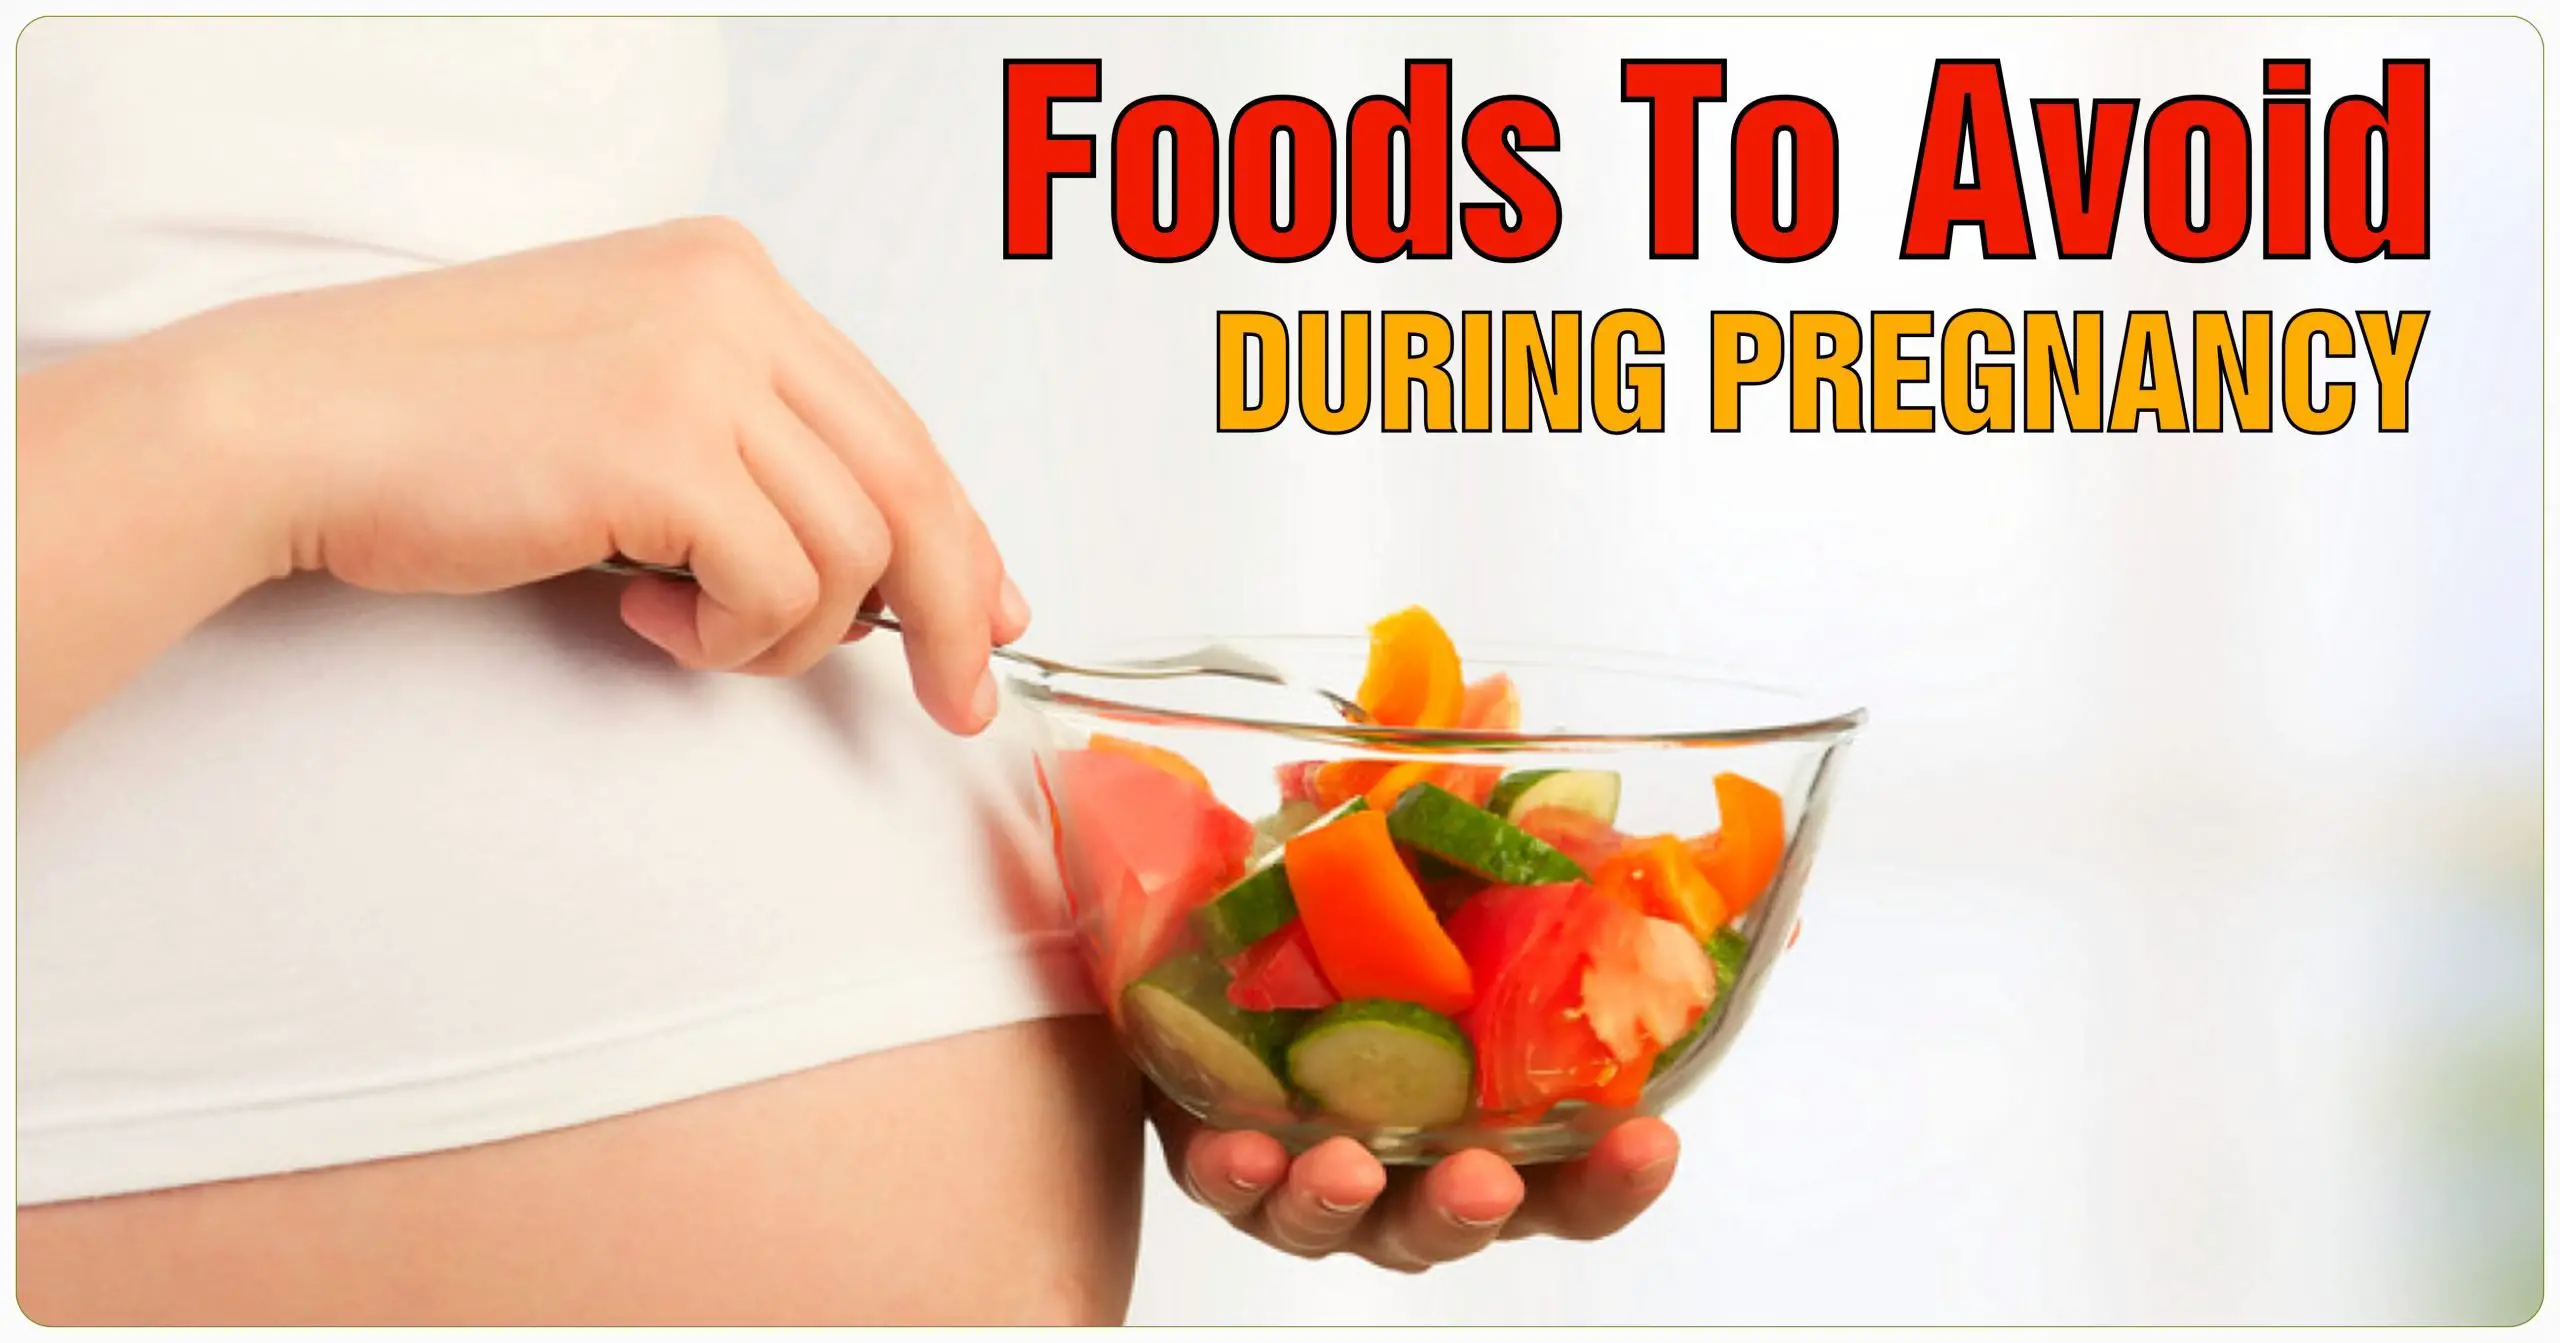 What Not To Eat During Pregnancy,fruits to avoid during ...